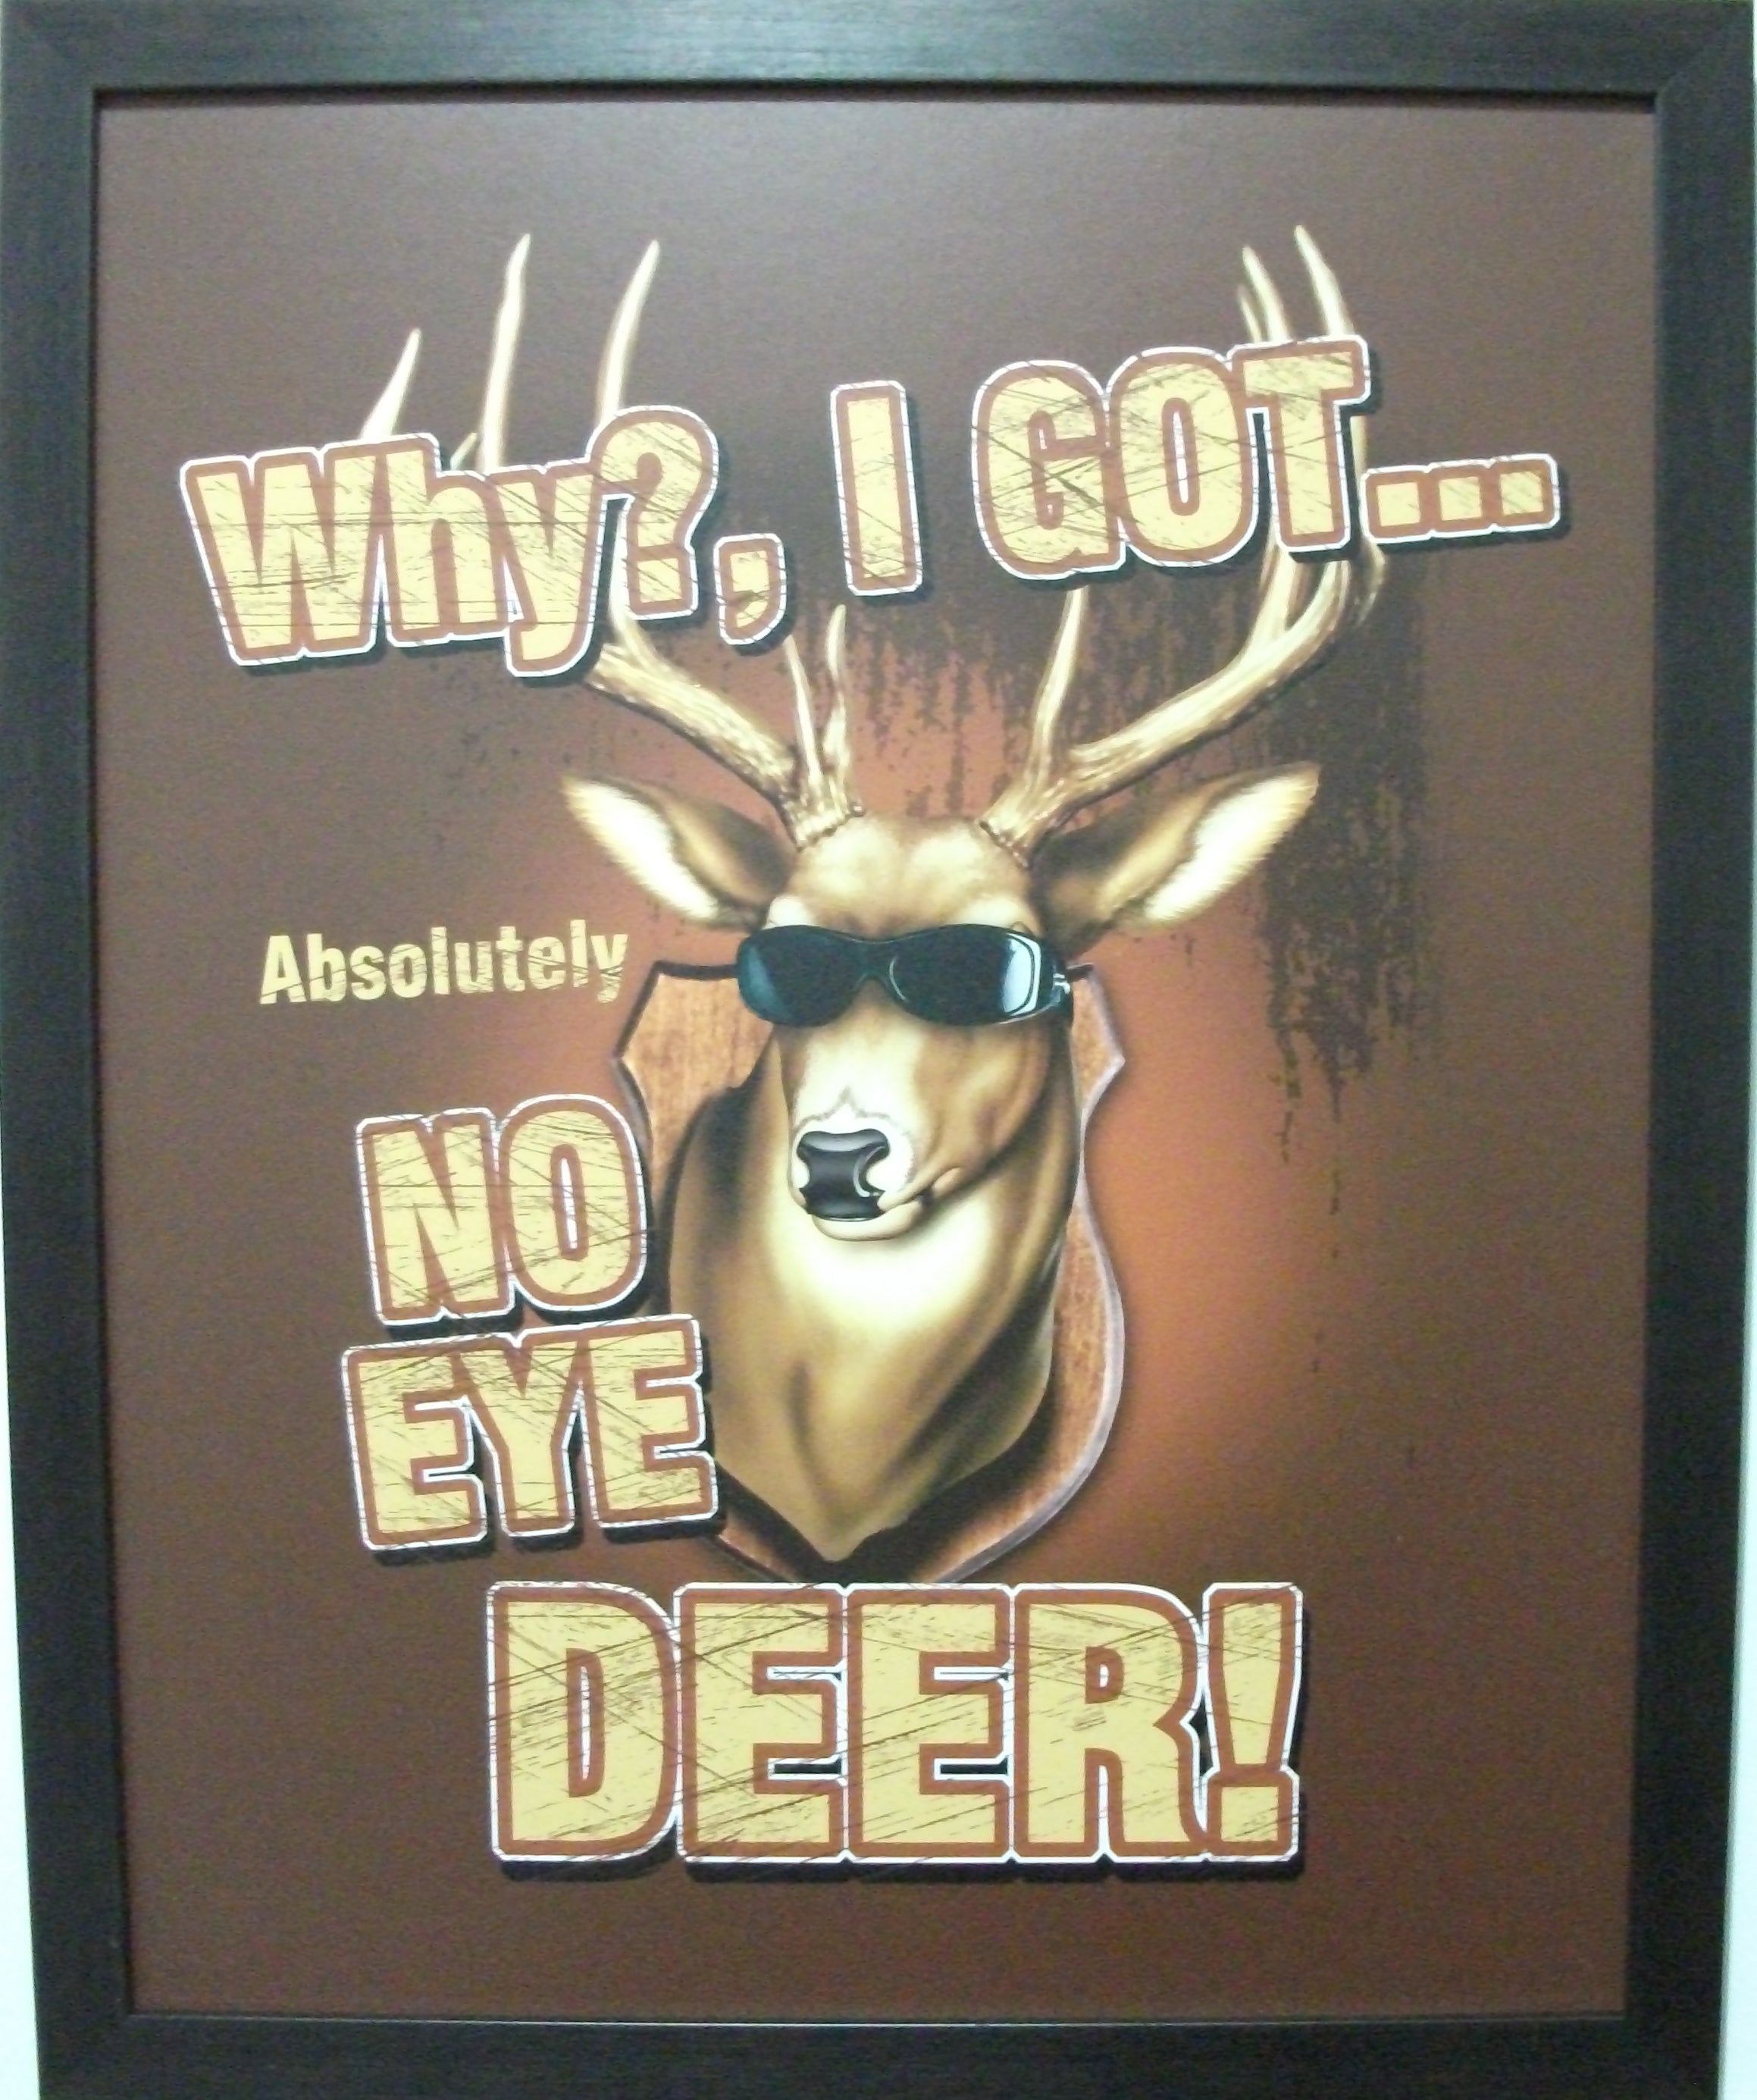 Why I Got Absolutely No Eye Deer